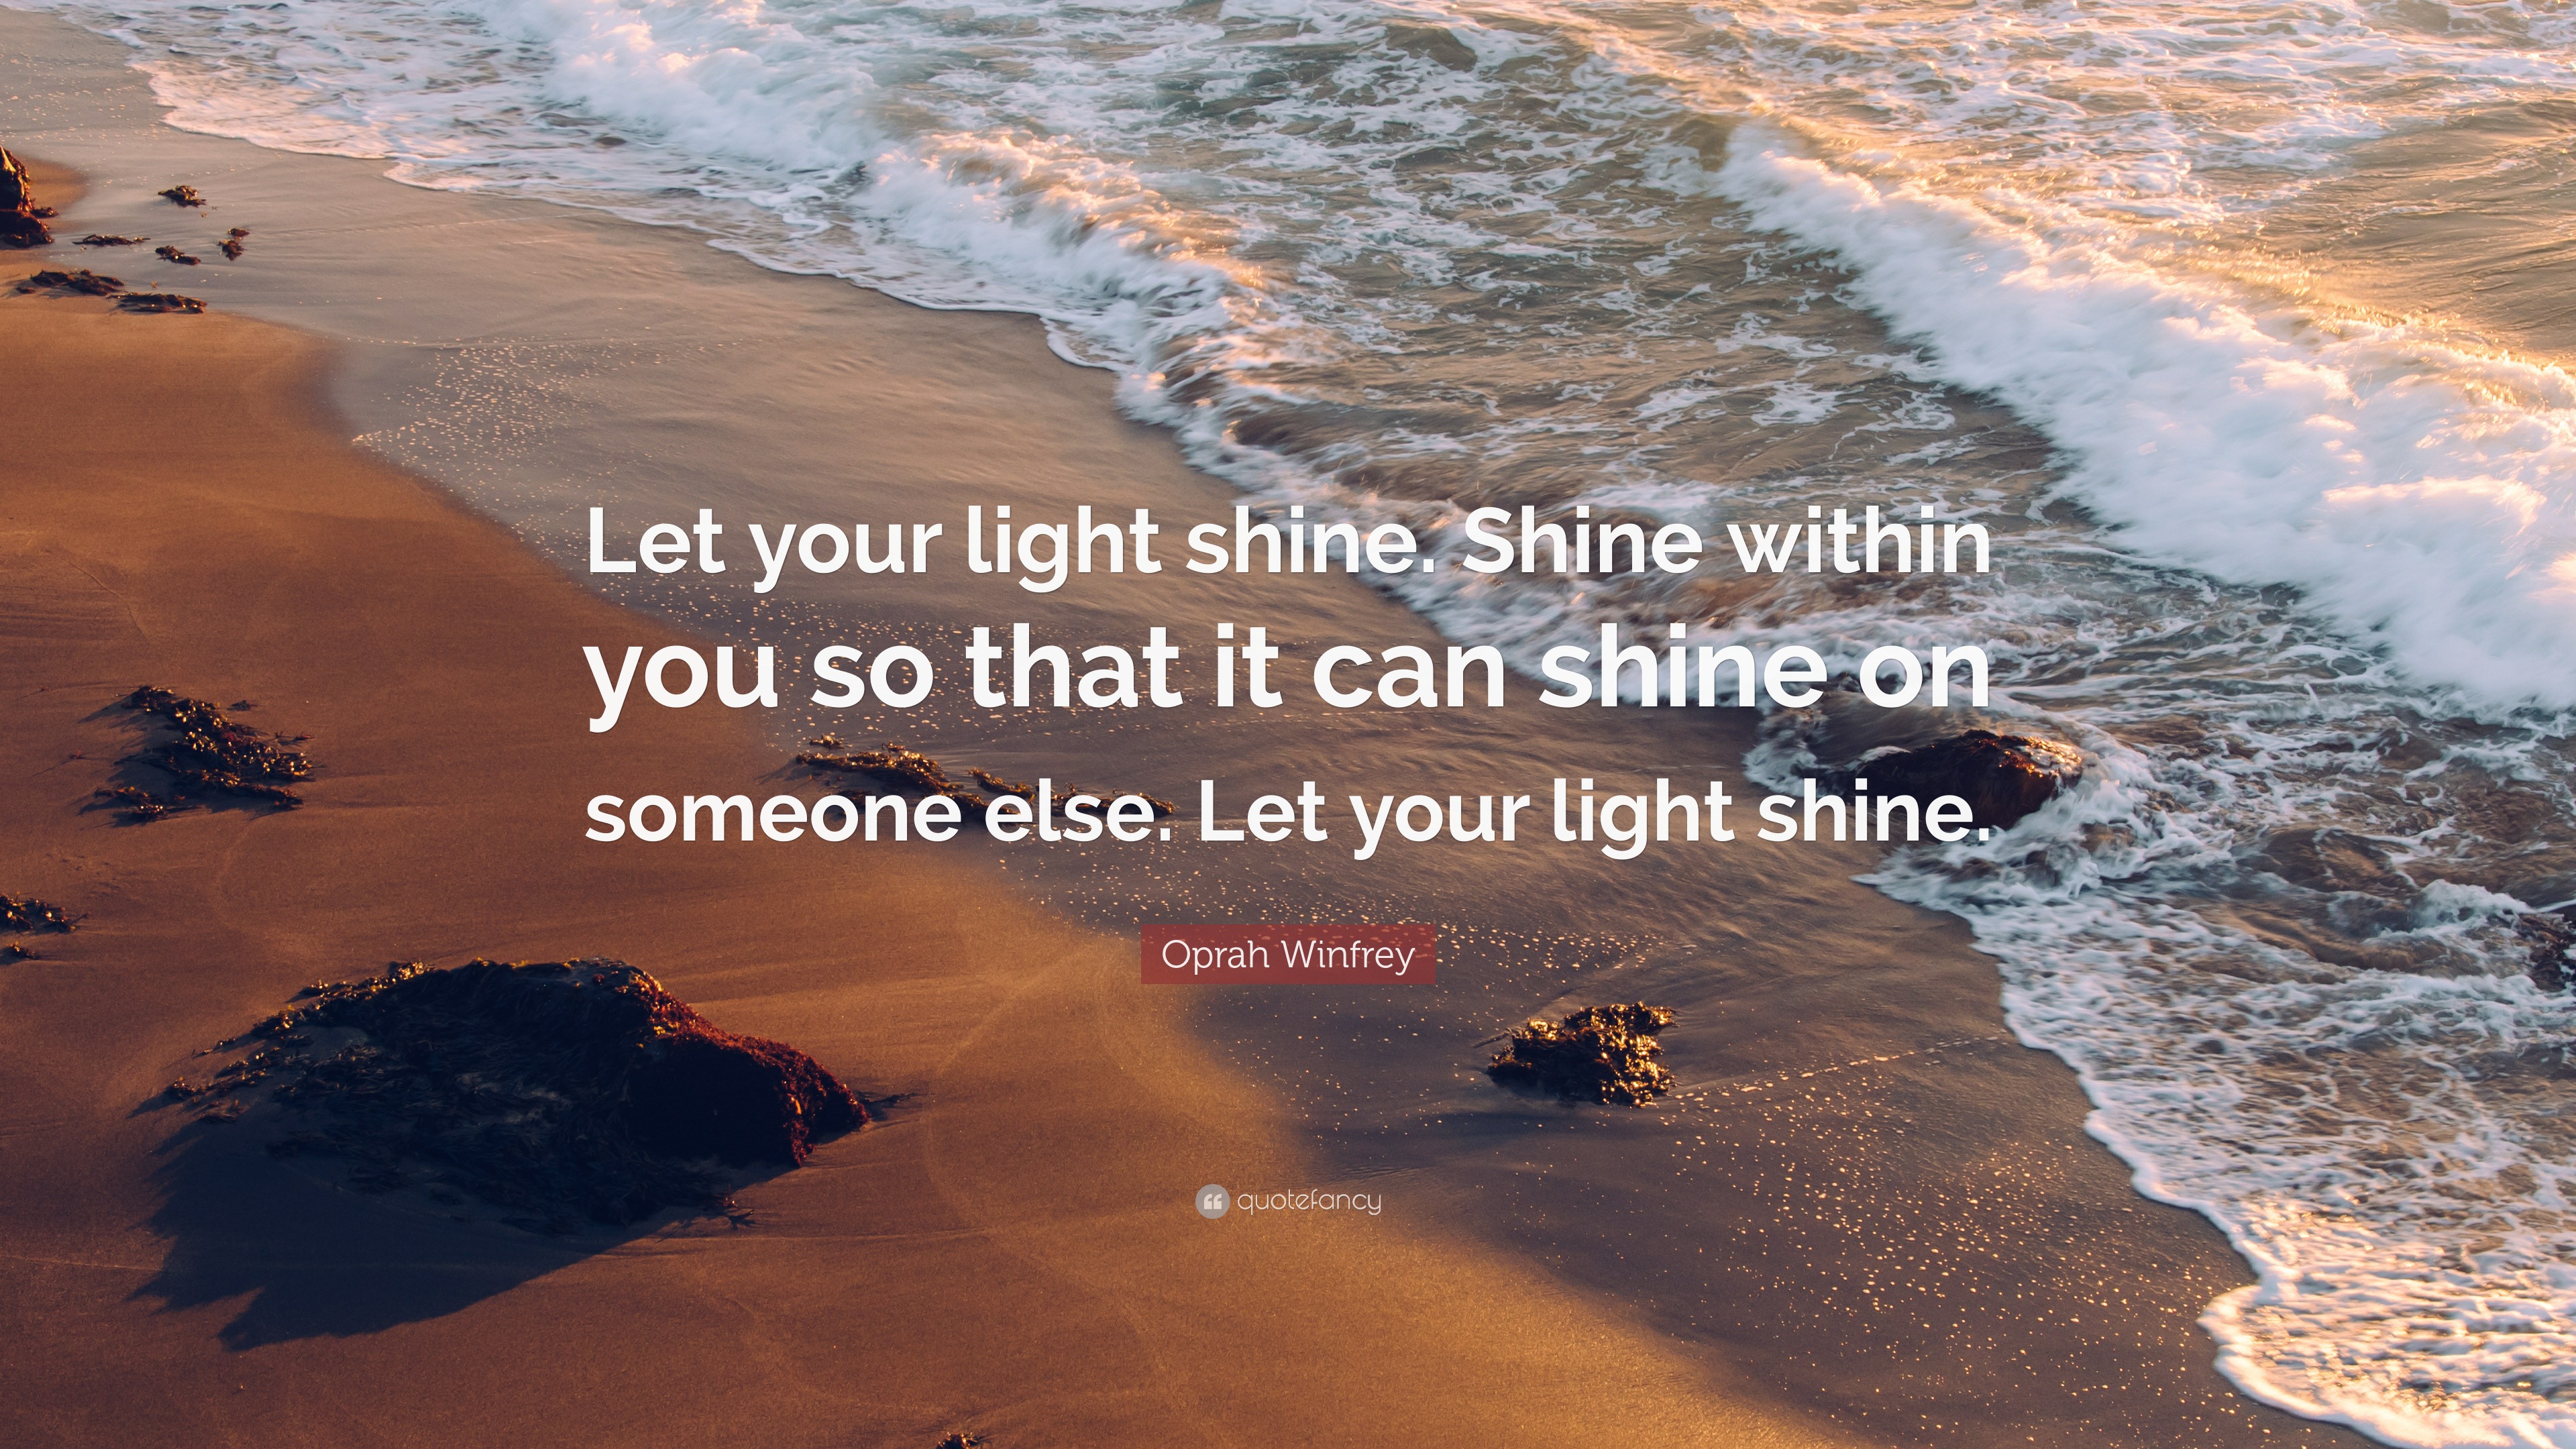 Oprah Winfrey Quote: “Let your light shine. Shine within you so that it can  shine on